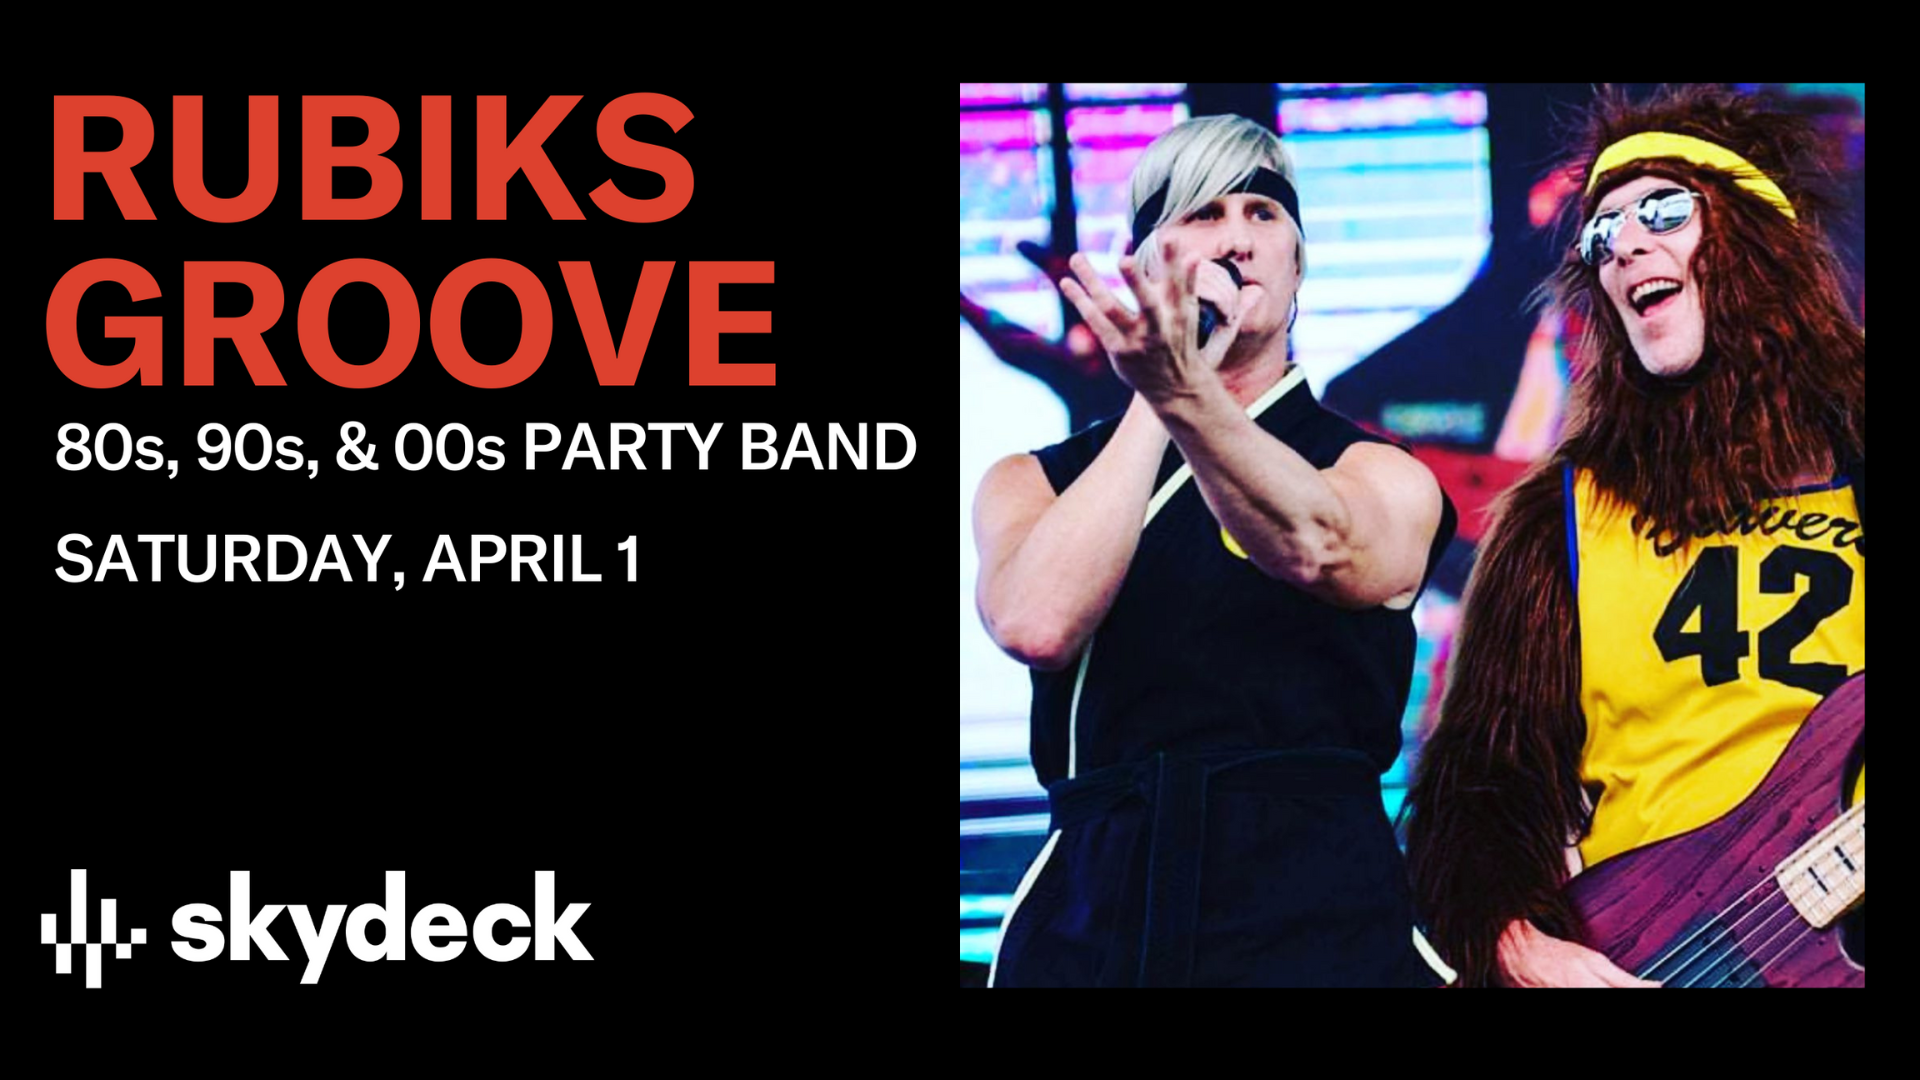 Promo image of 80s, 90s, & 00s Party Band: Rubiks Groove on Skydeck